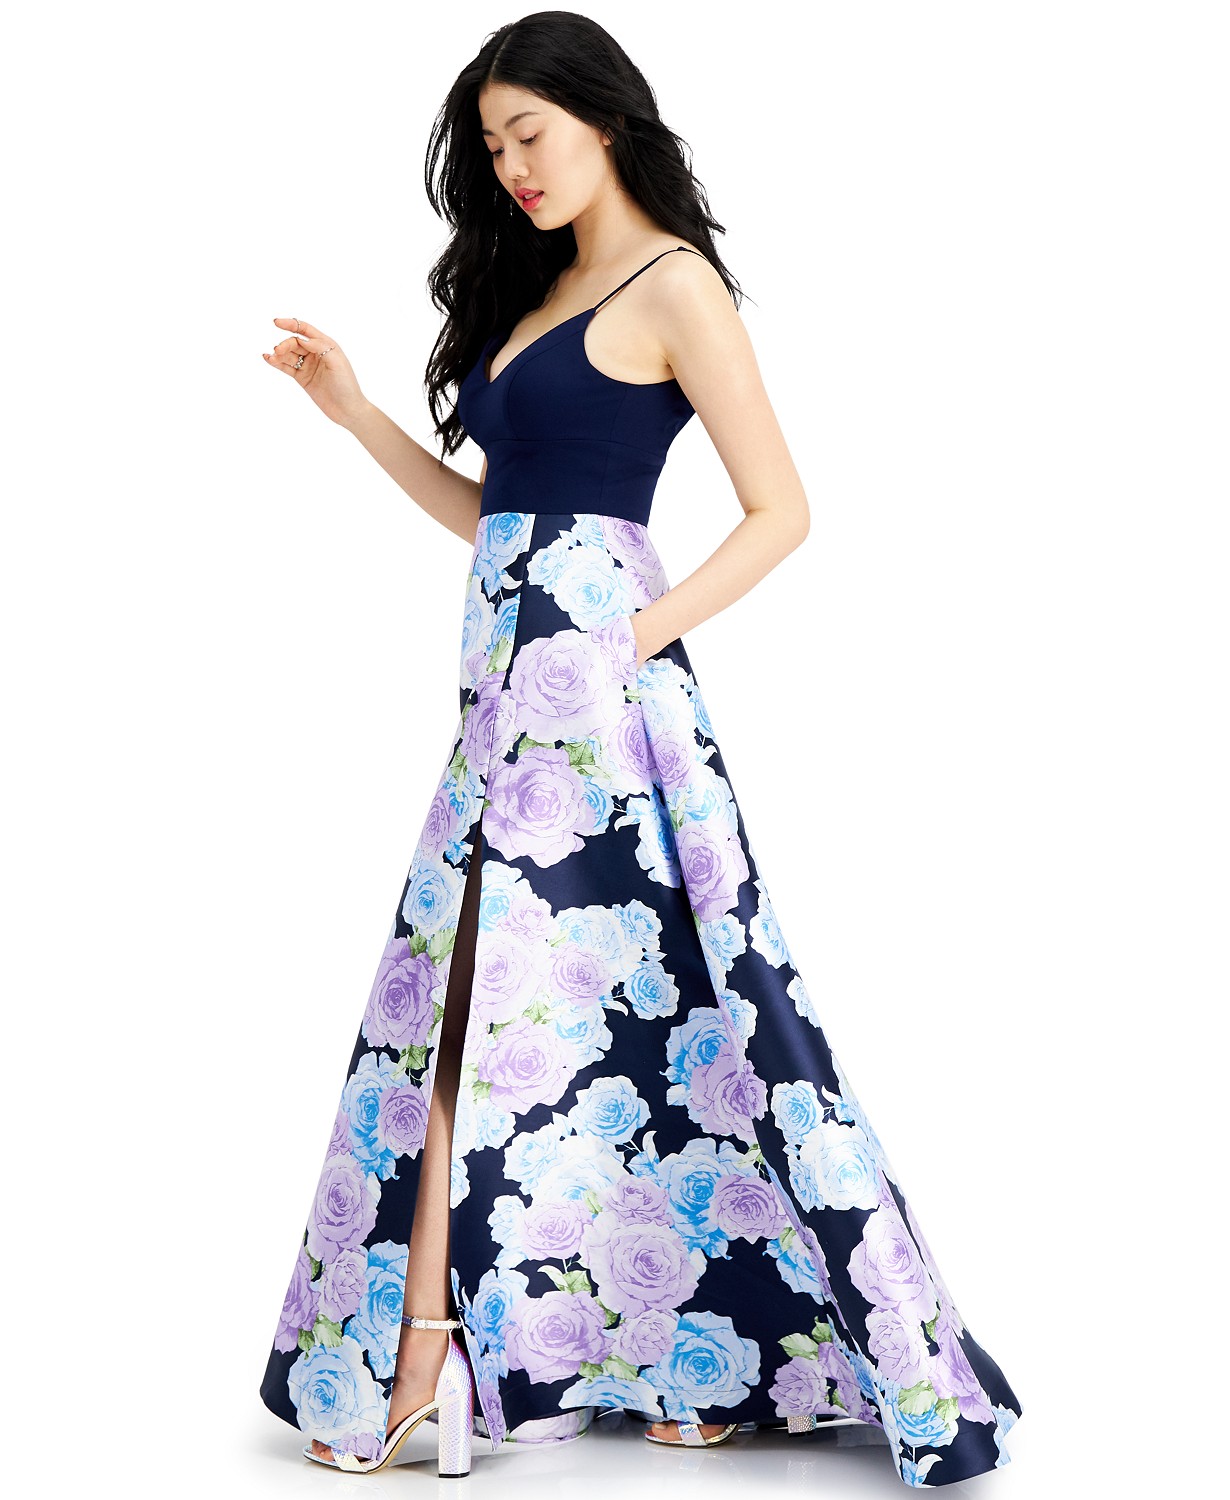 Macy's Prom Juniors floral print Gown Dress navy-purple color side-view